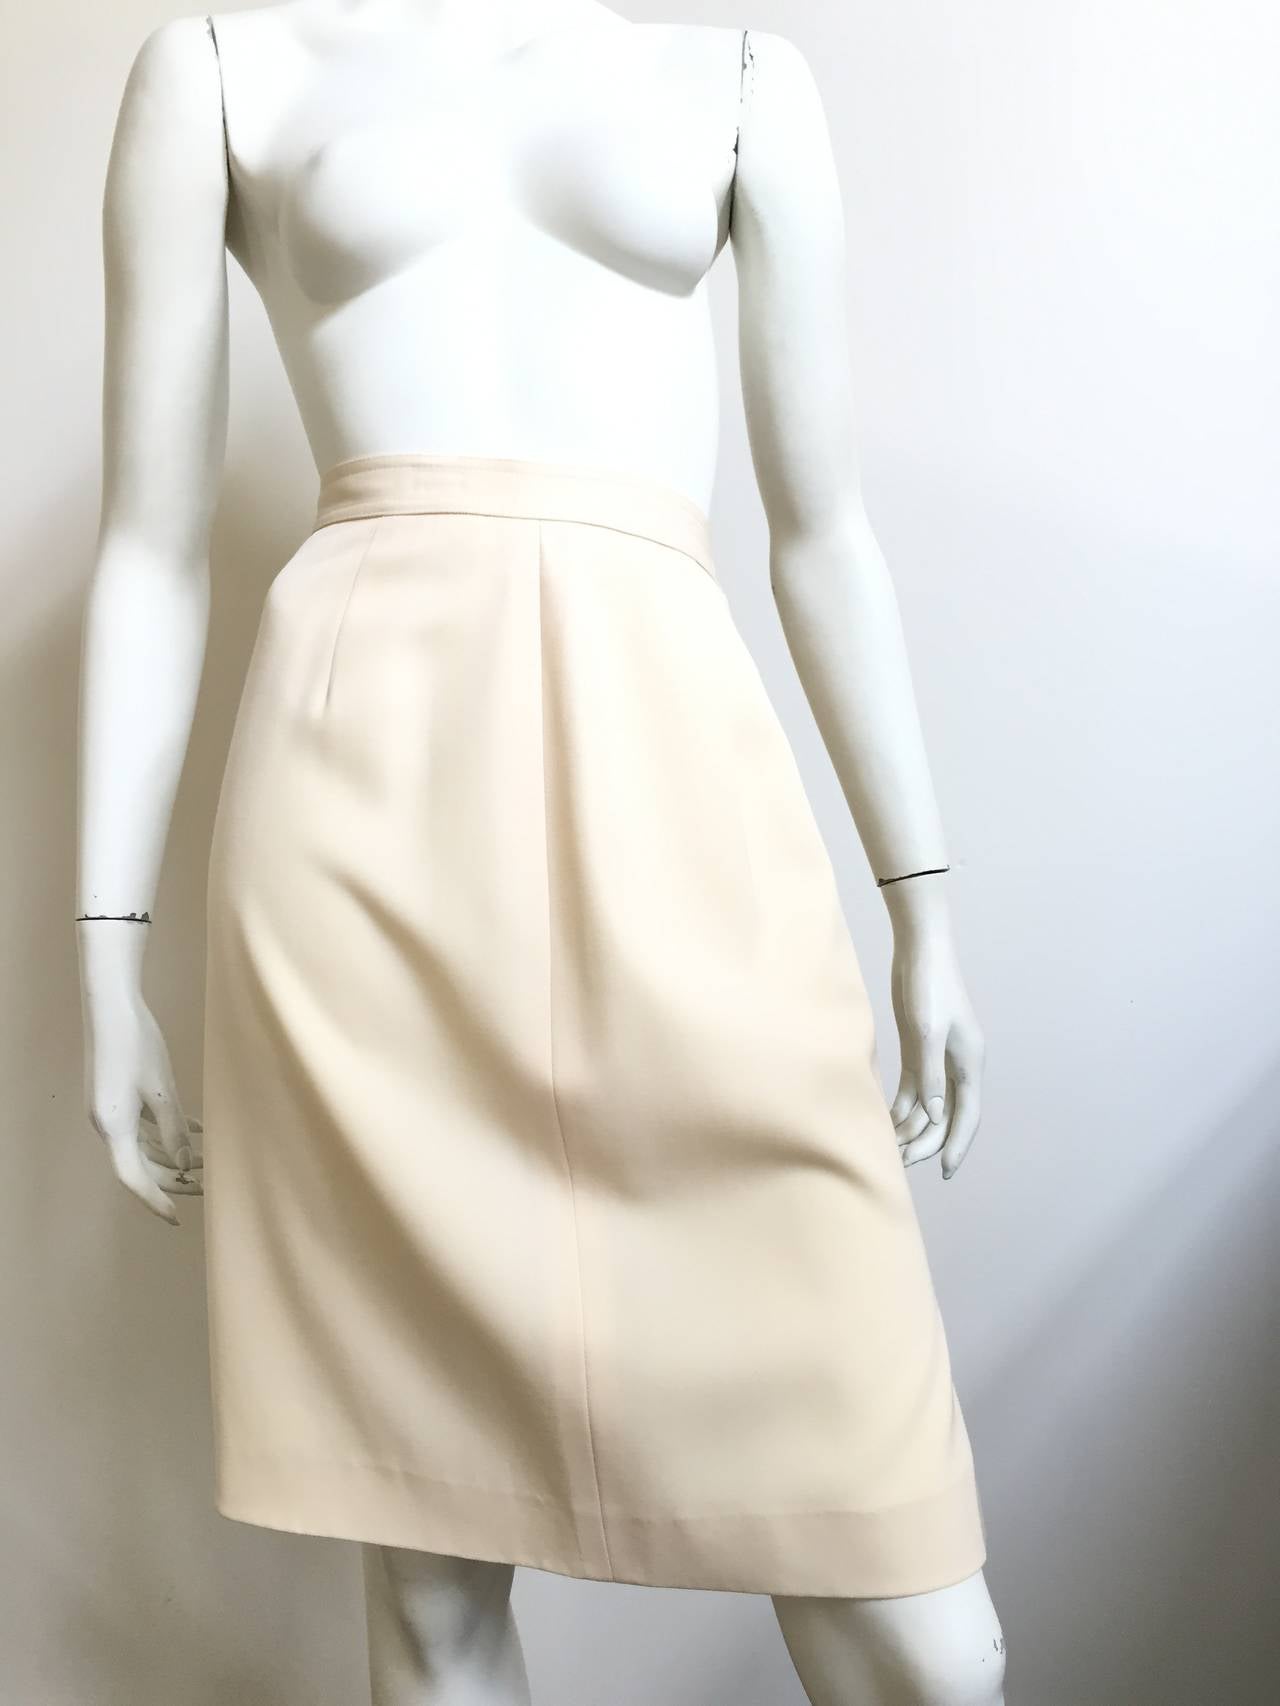 Valentino Miss V 1980s wool cream skirt is a vintage size 10 / 44 but fits like a modern USA size 6.   Please see & use the measures provided to properly measure your lovely body because we want to make Valentino proud. Skirt is lined. There are